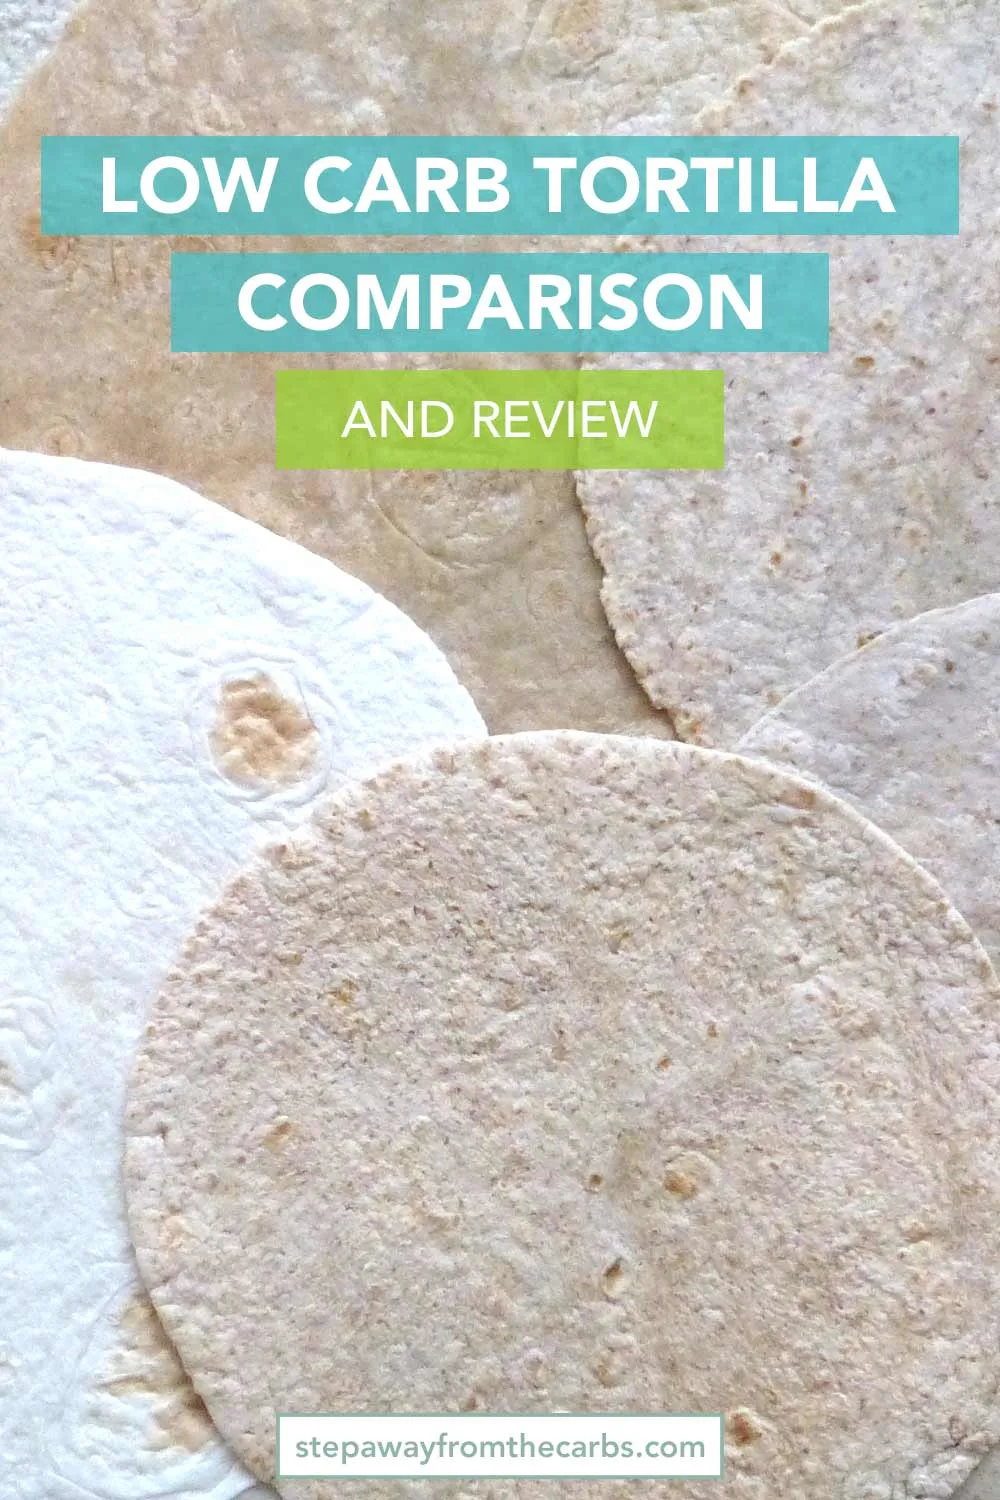 Low Carb Tortilla Comparison and Review - including carb counts and where to buy!